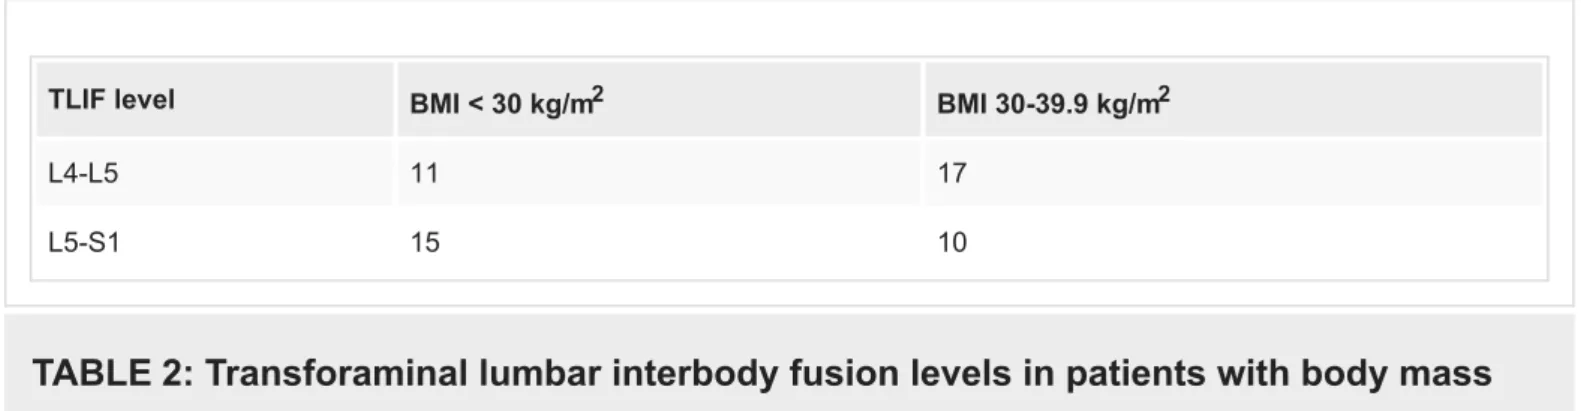 TABLE 2: Transforaminal lumbar interbody fusion levels in patients with body mass index (BMI) &lt; 30 kg/m2 and BMI 30–39.9 kg/m2.